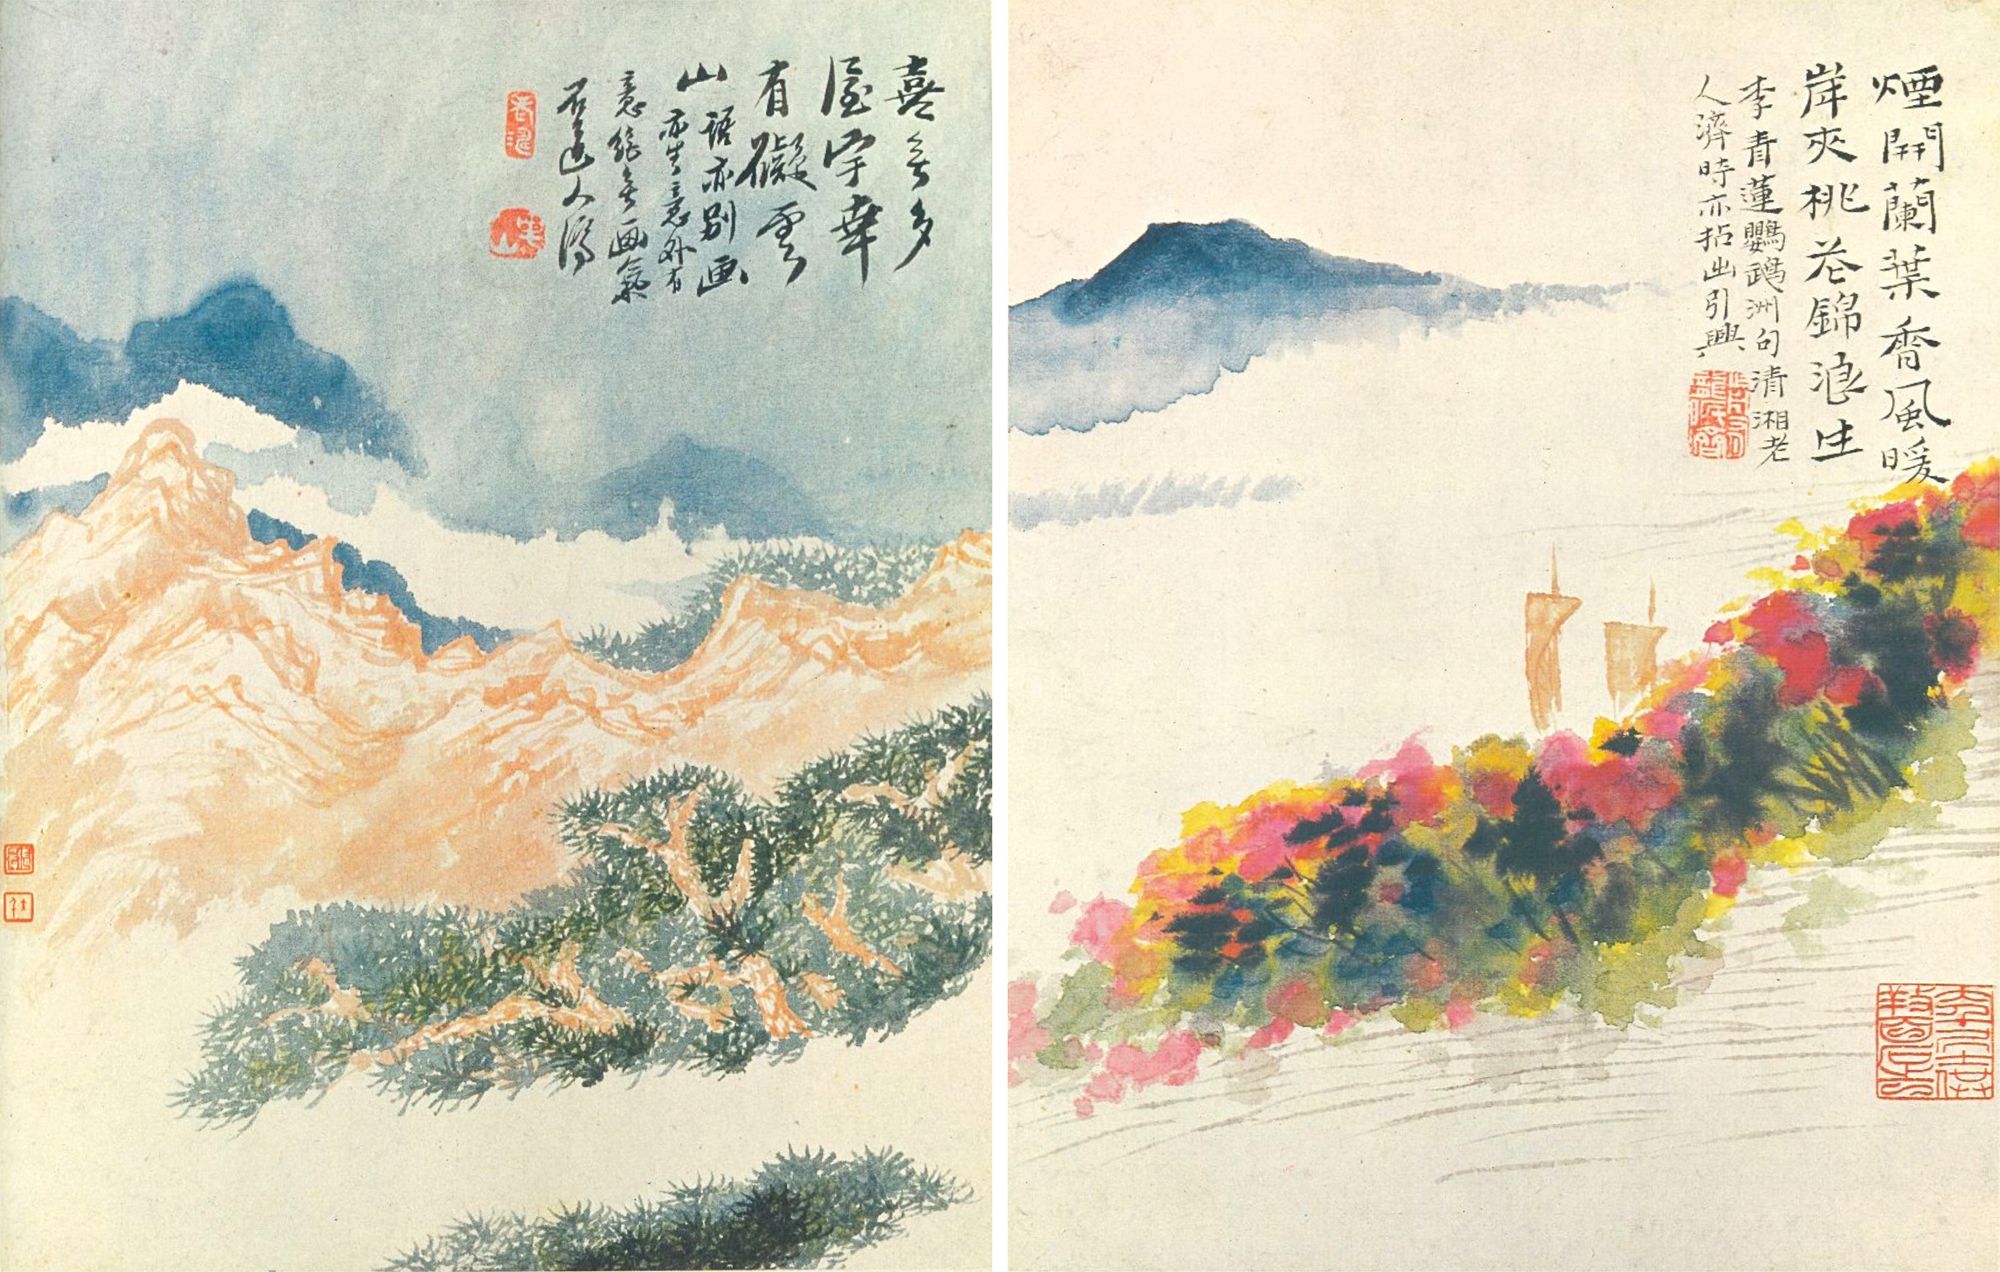 Paintings by Tao-chi: (left) Mountain-blocked Clouds, (right) Riverbank of Peach Blossoms